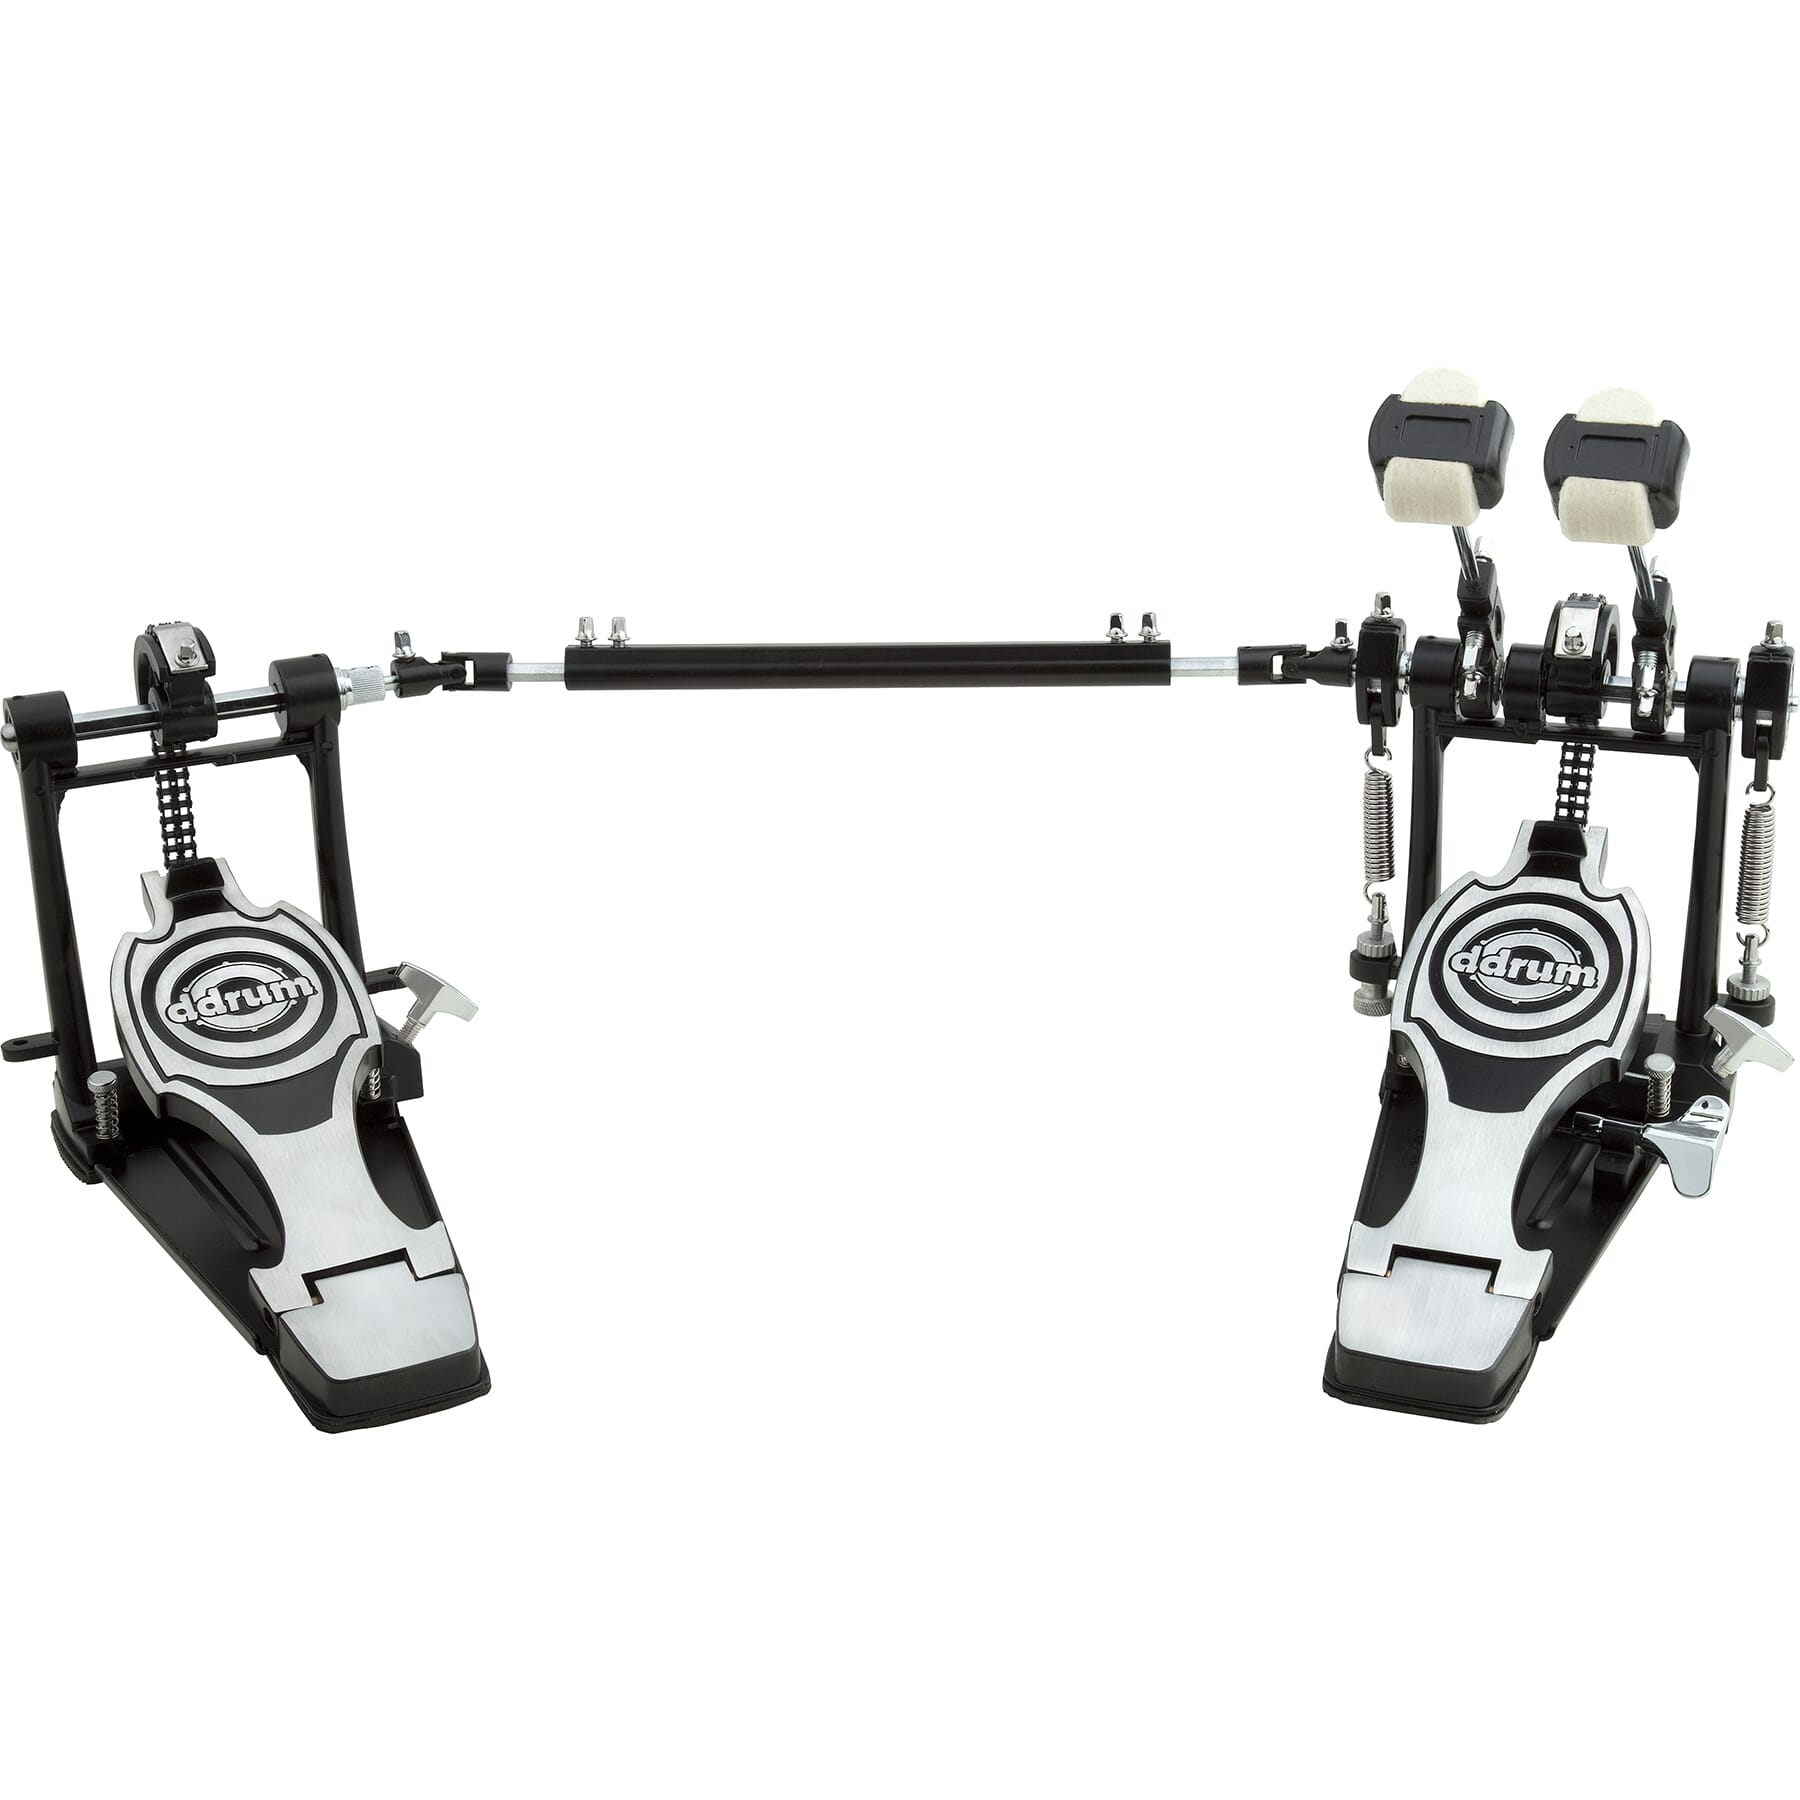 RX Series Double Bass drum pedal